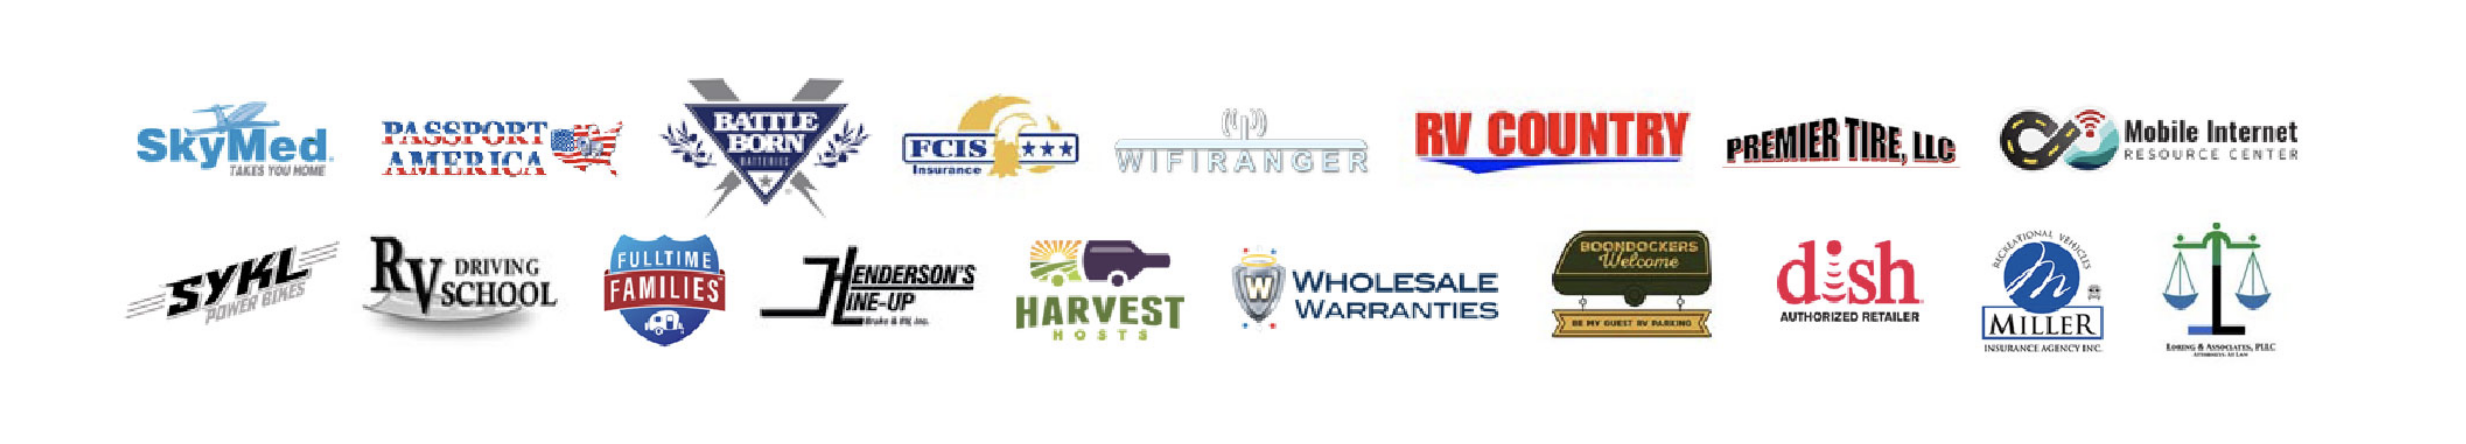 Variety of logos of companies offering Escapees members discounts, to help members save the most money with an Escapees RV Club membership